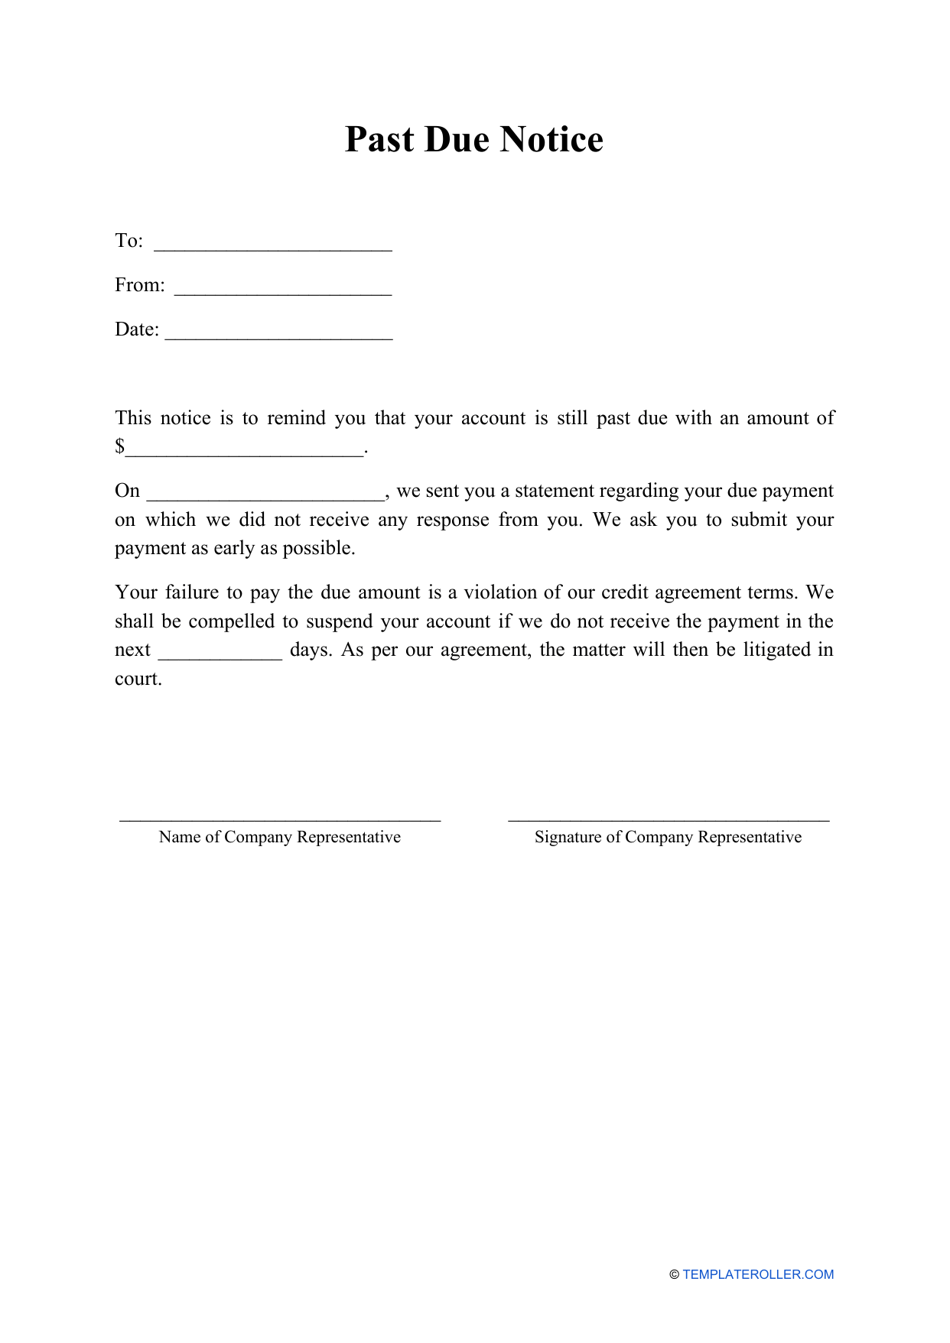 Past Due Notice Template Download Printable PDF Templateroller